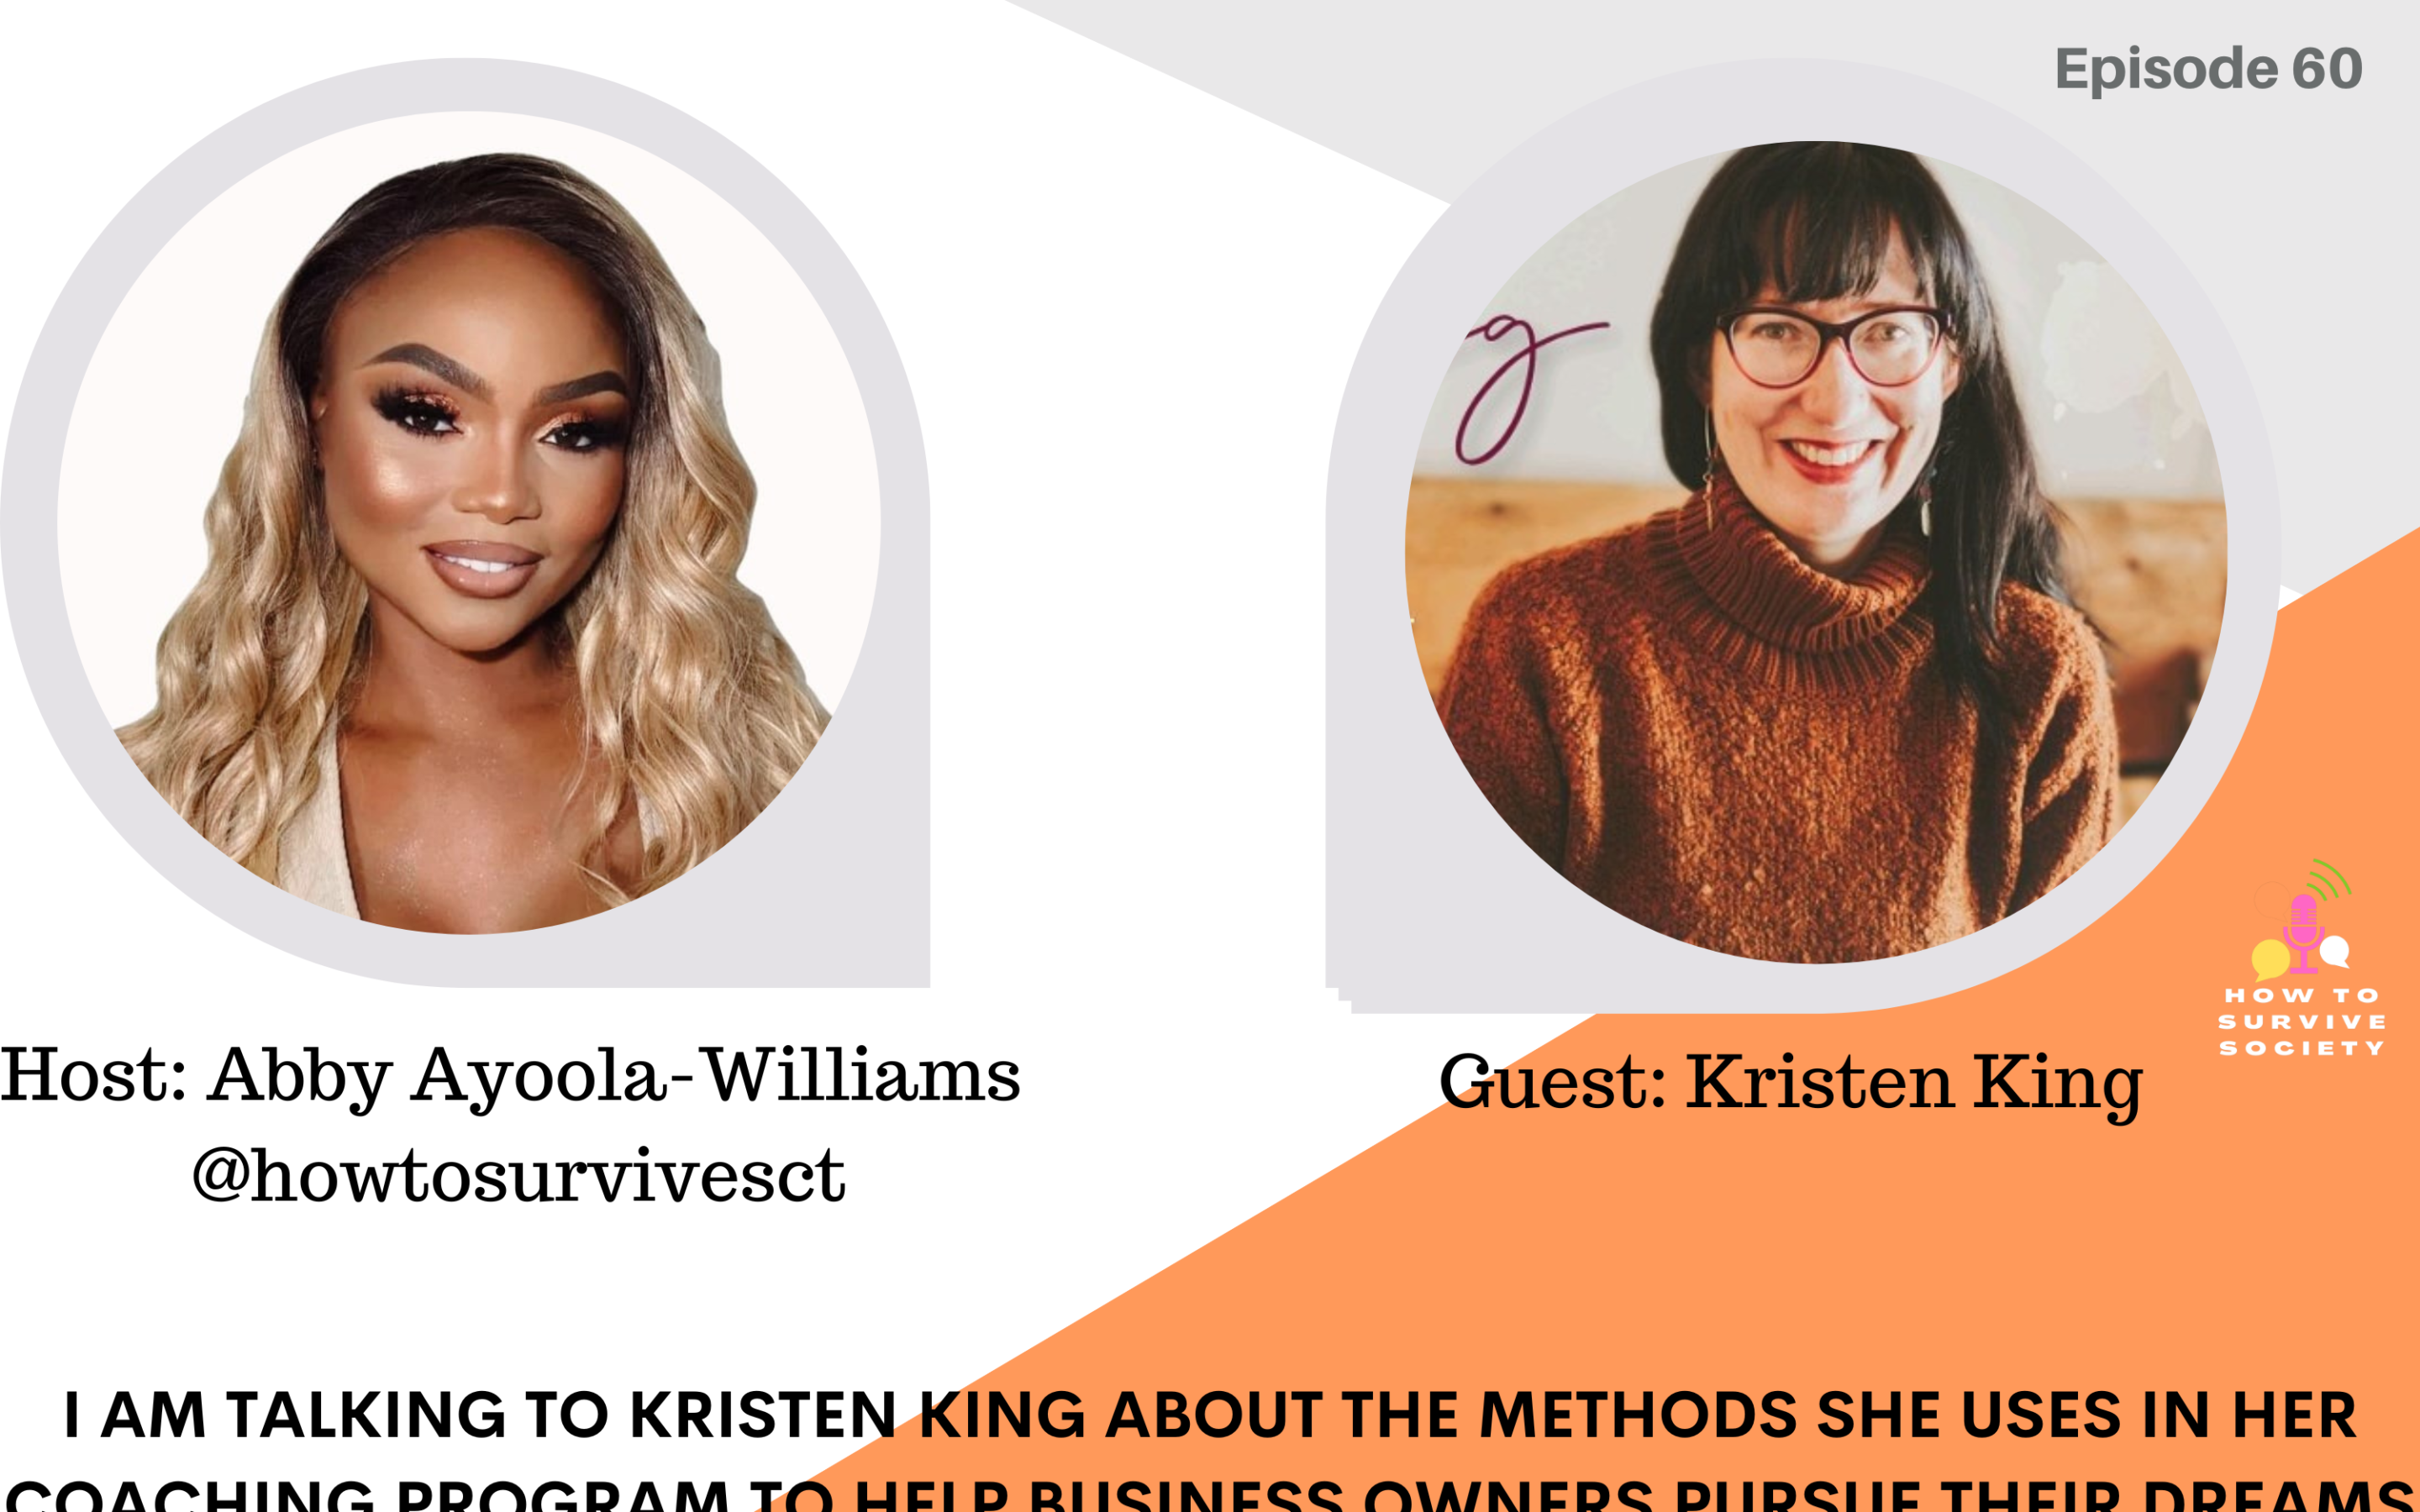 New Interview: Methods to Help Business Owners Pursue Their Dreams Fearlessly with Kristen King on the How to Survive Society Podcast